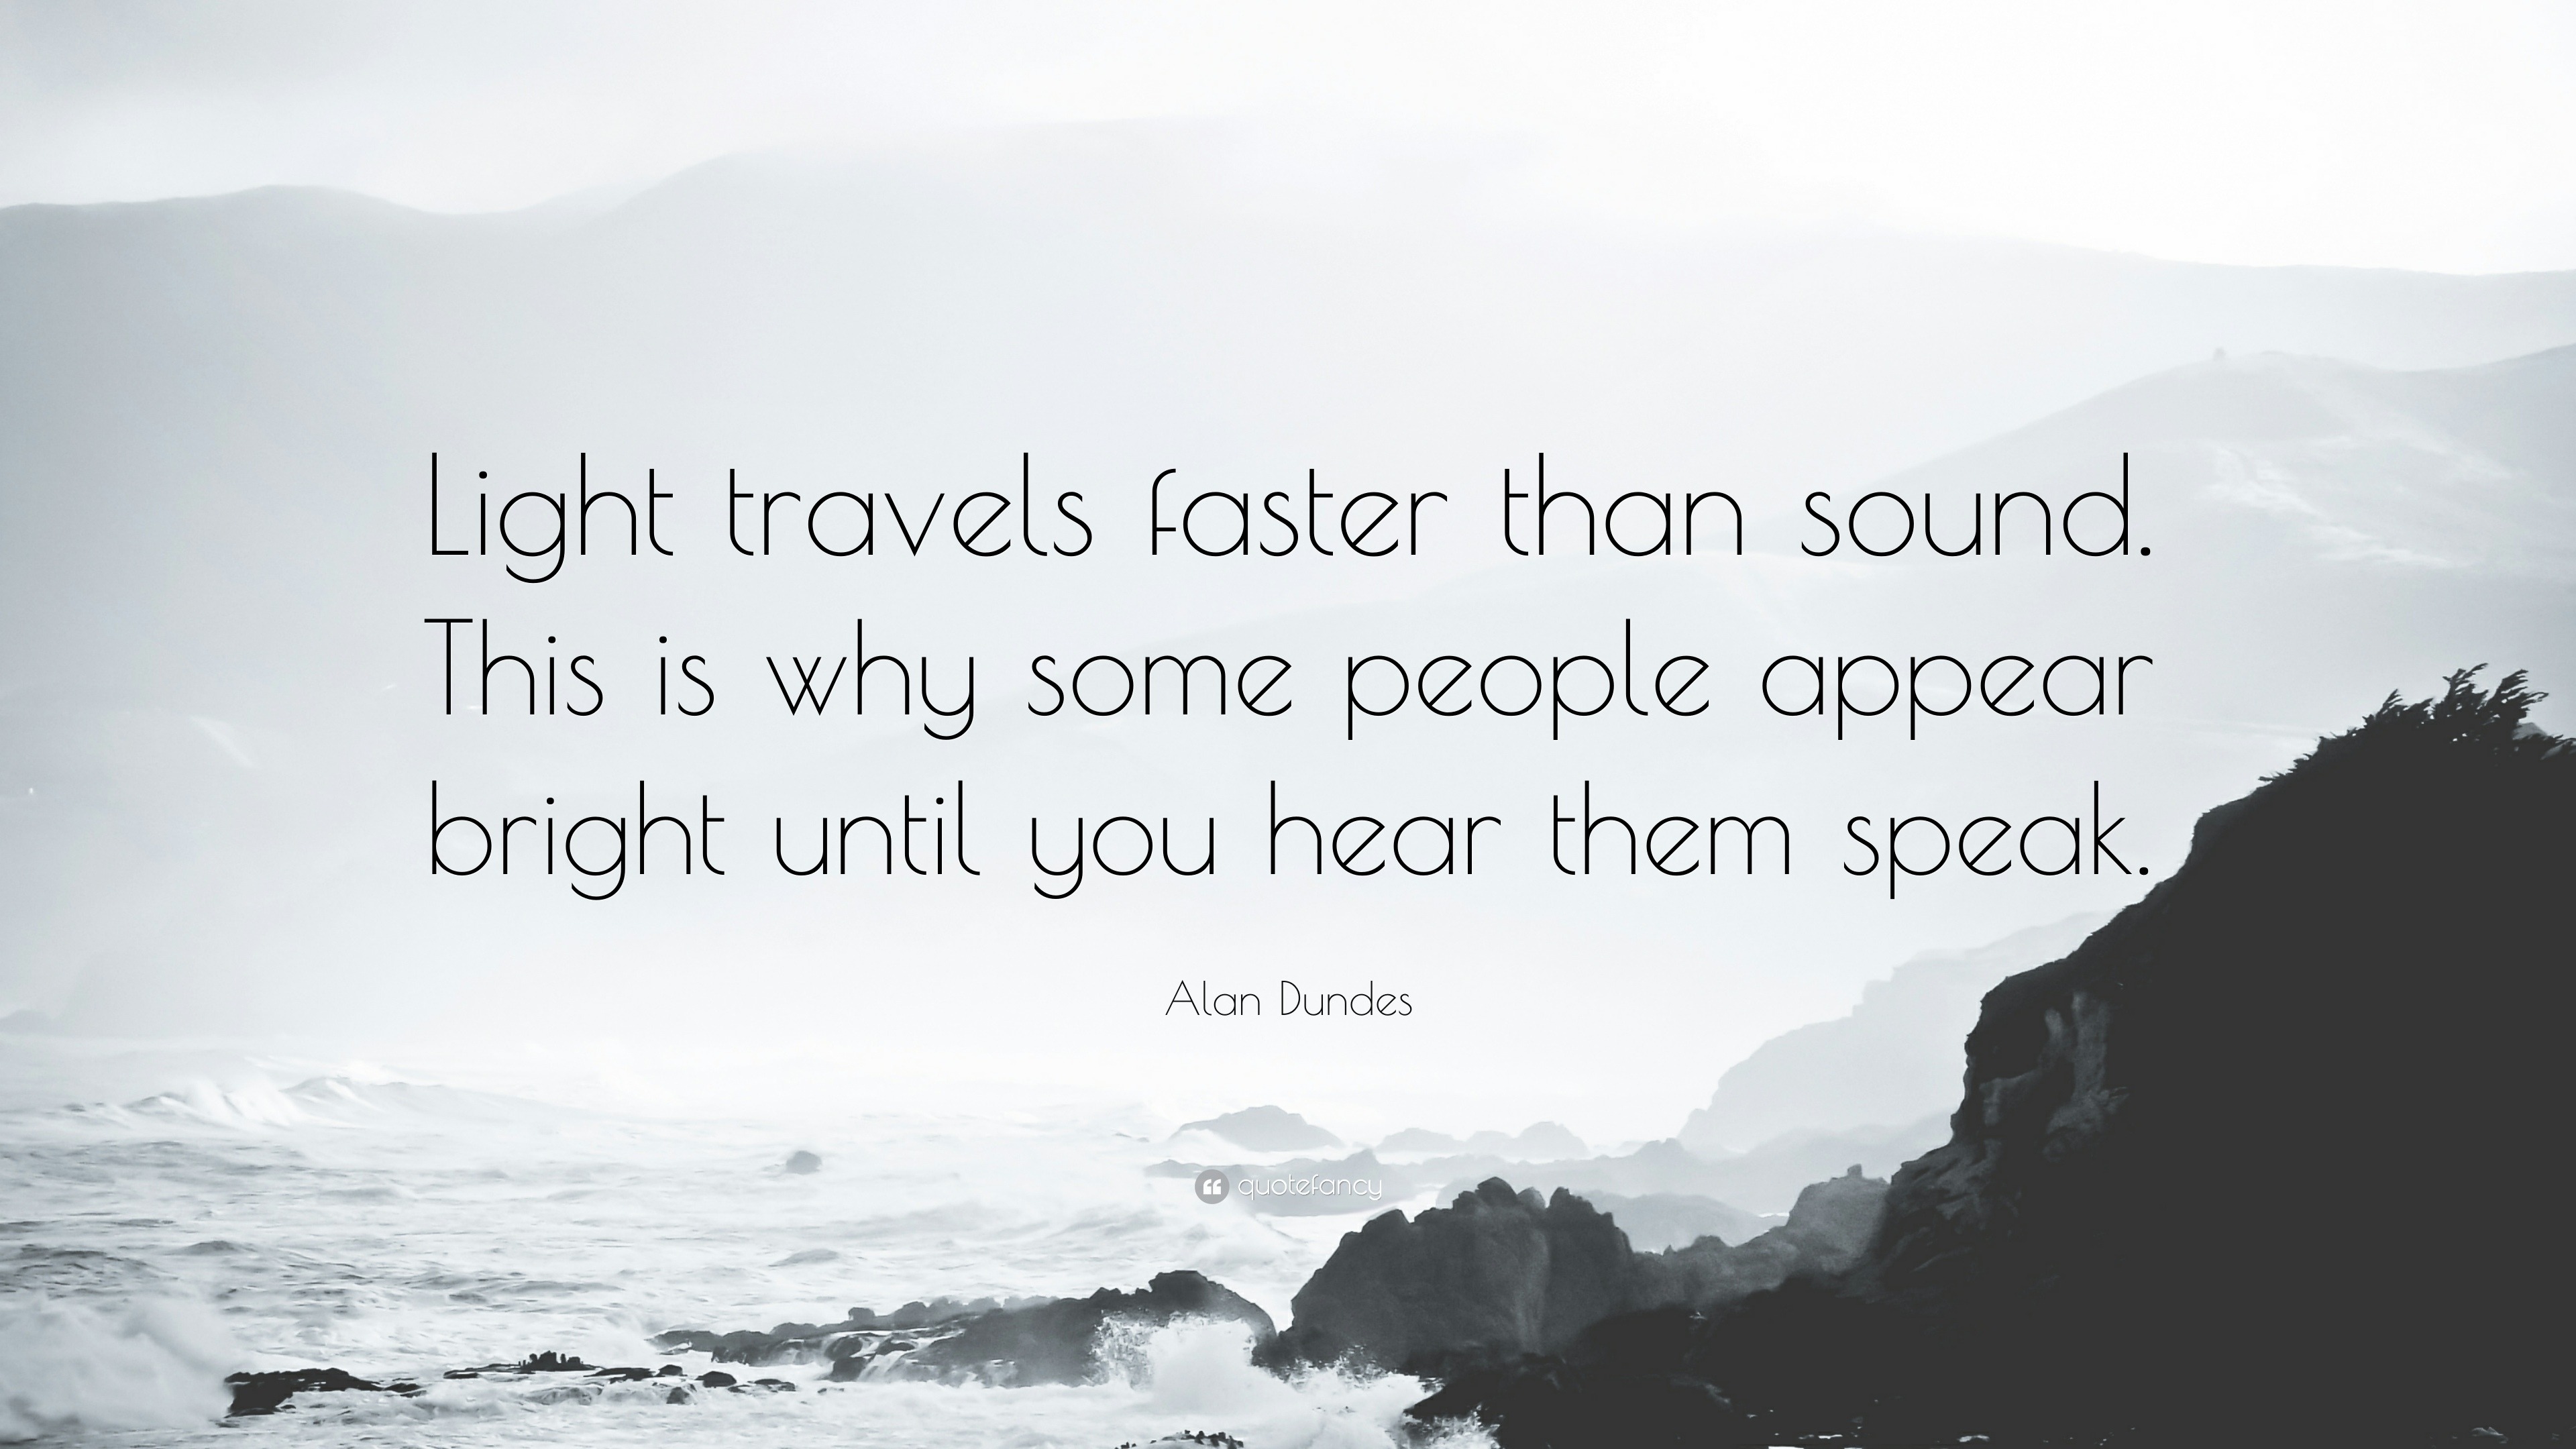 What travels faster than sound